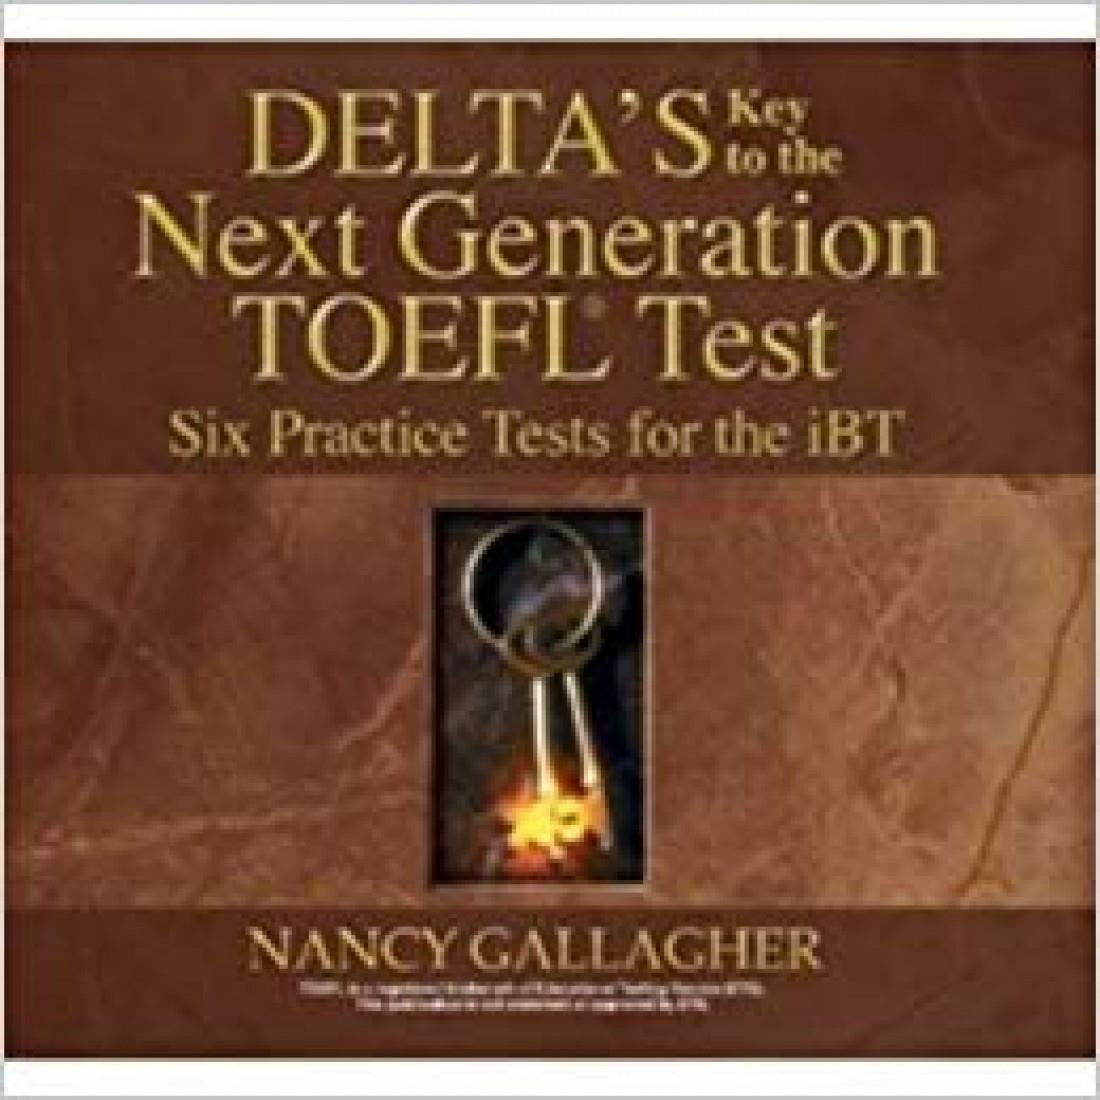 DELTAS KEY TO THE NEXT GENERATION TOEFL TESTS CDS(6)